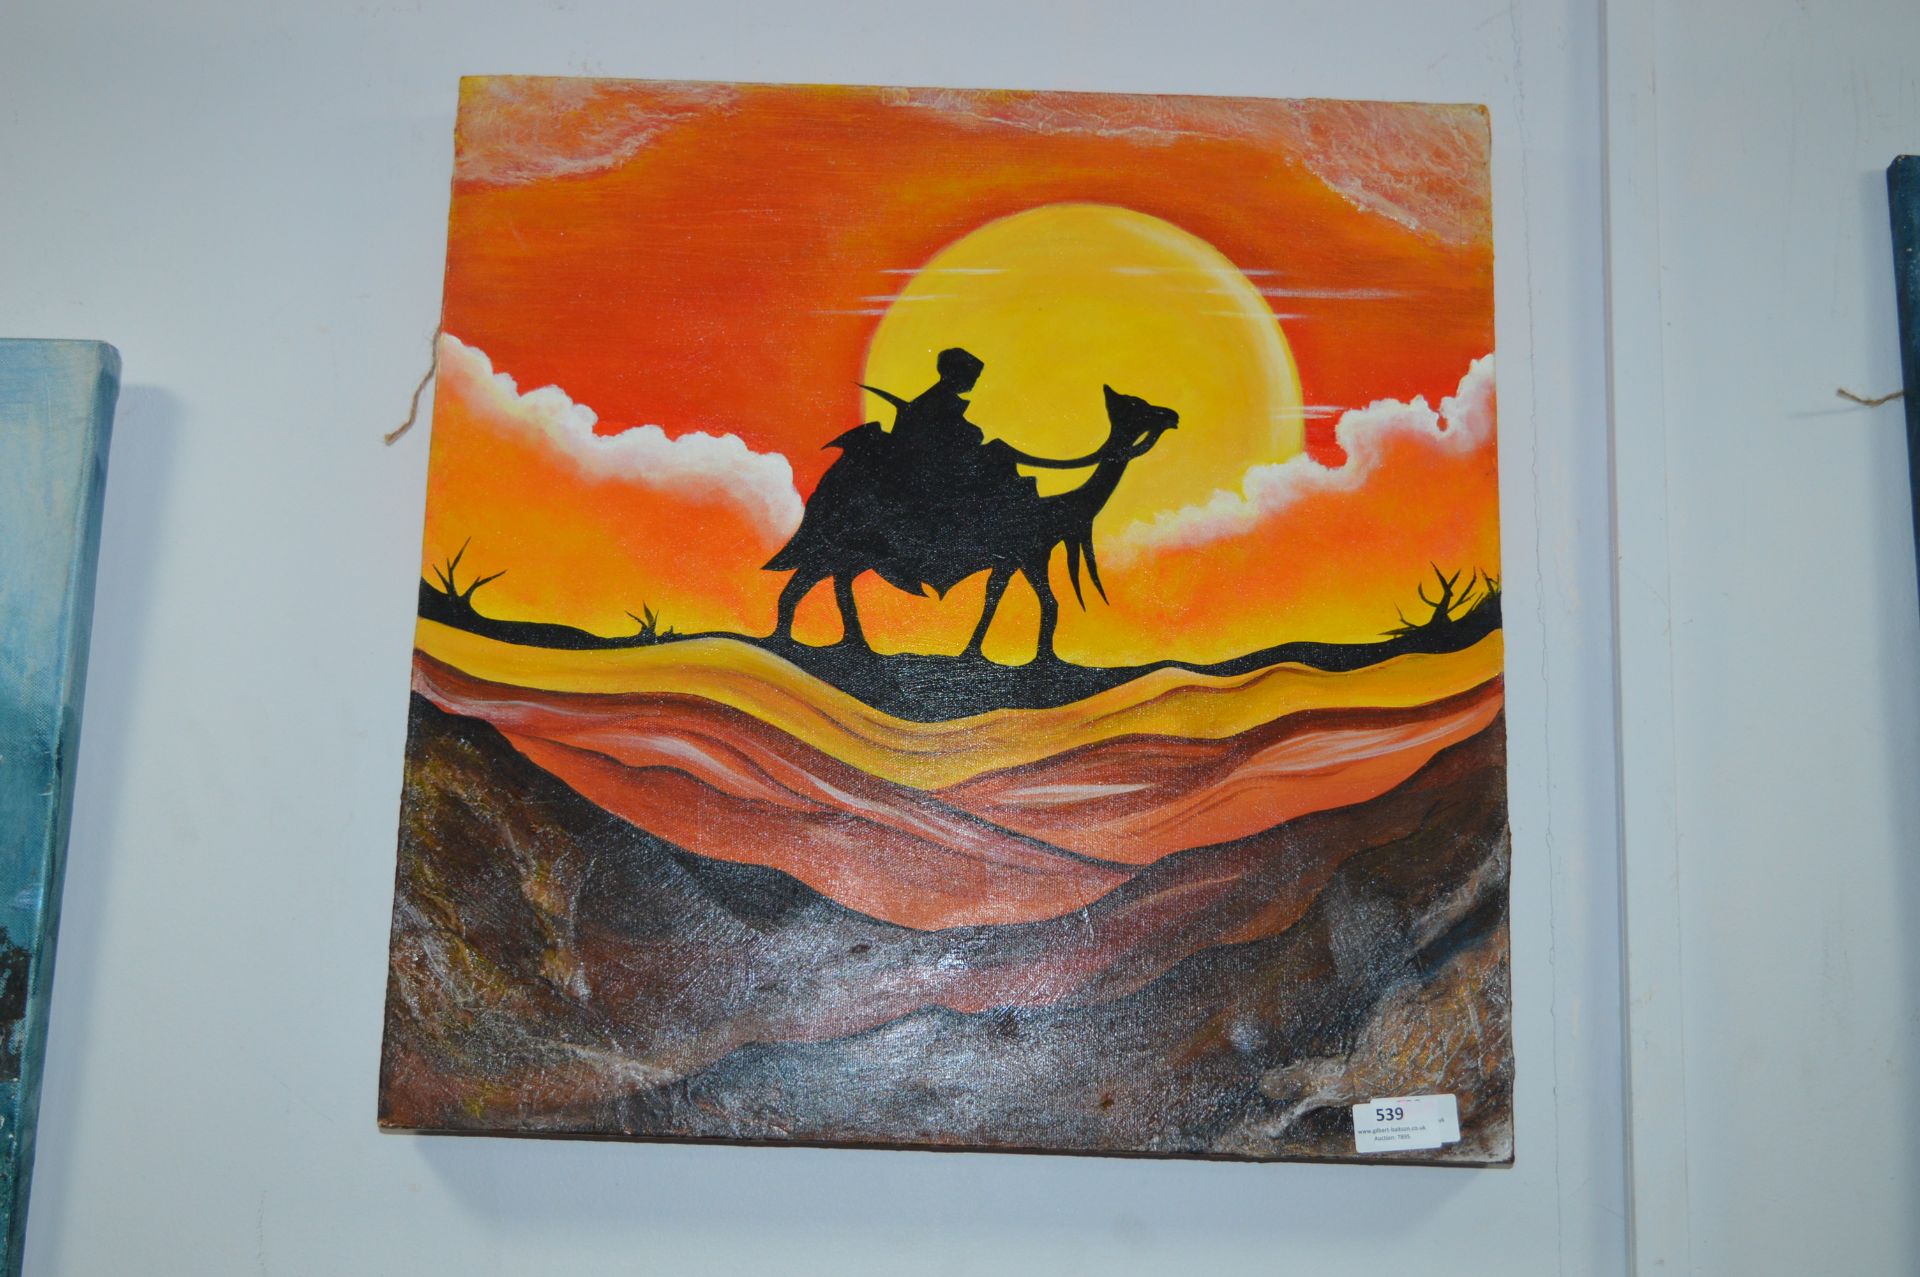 Acrylic Painting on Canvas - Boy on Camel by Dean